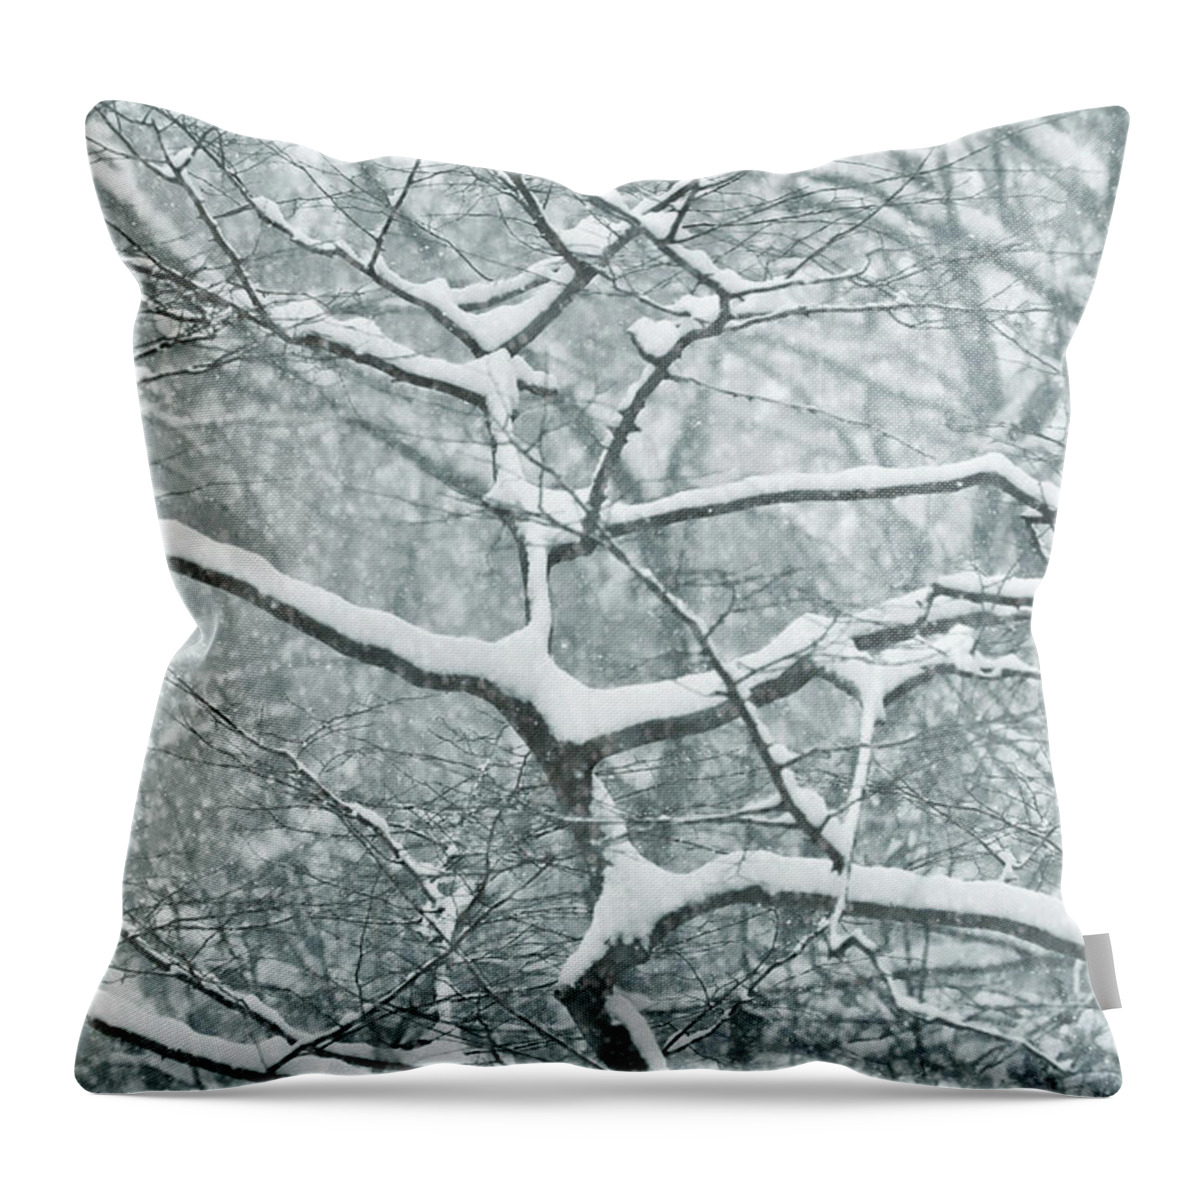 Bare Throw Pillow featuring the photograph Catching The Snow by JAMART Photography